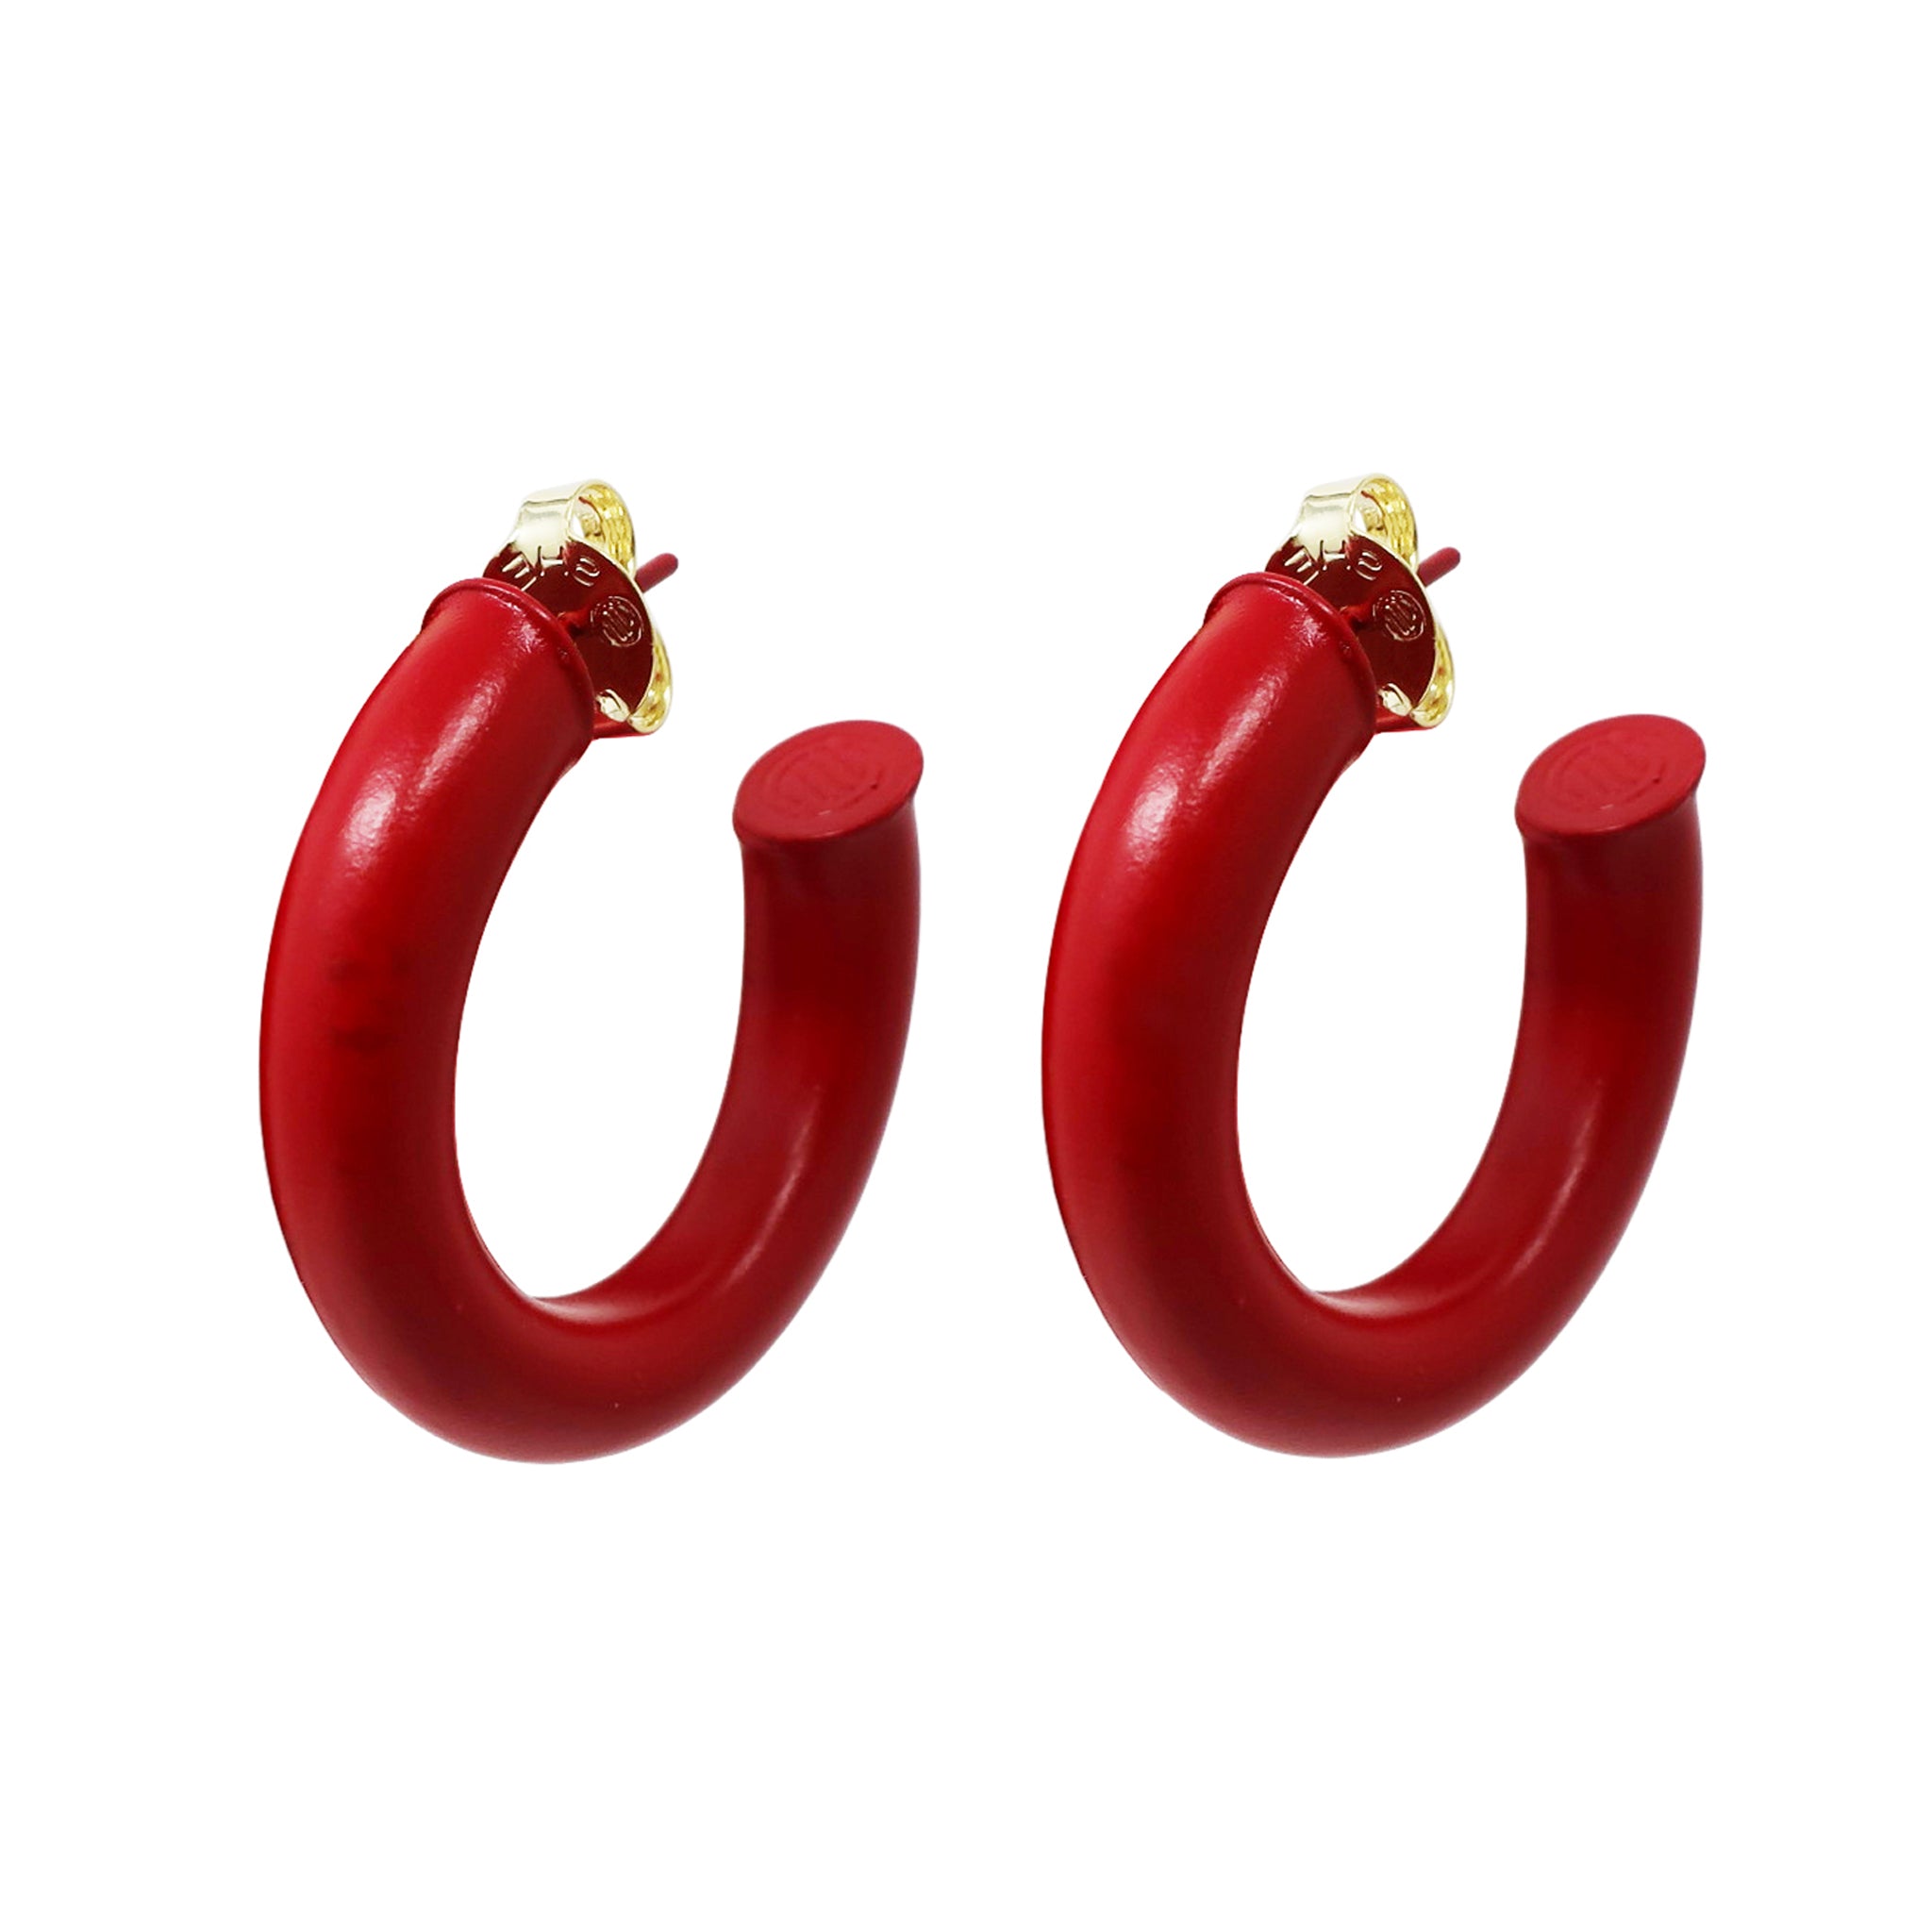 Sheila Fajl Thick Small Chantal Hoop Earrings in Painted Red